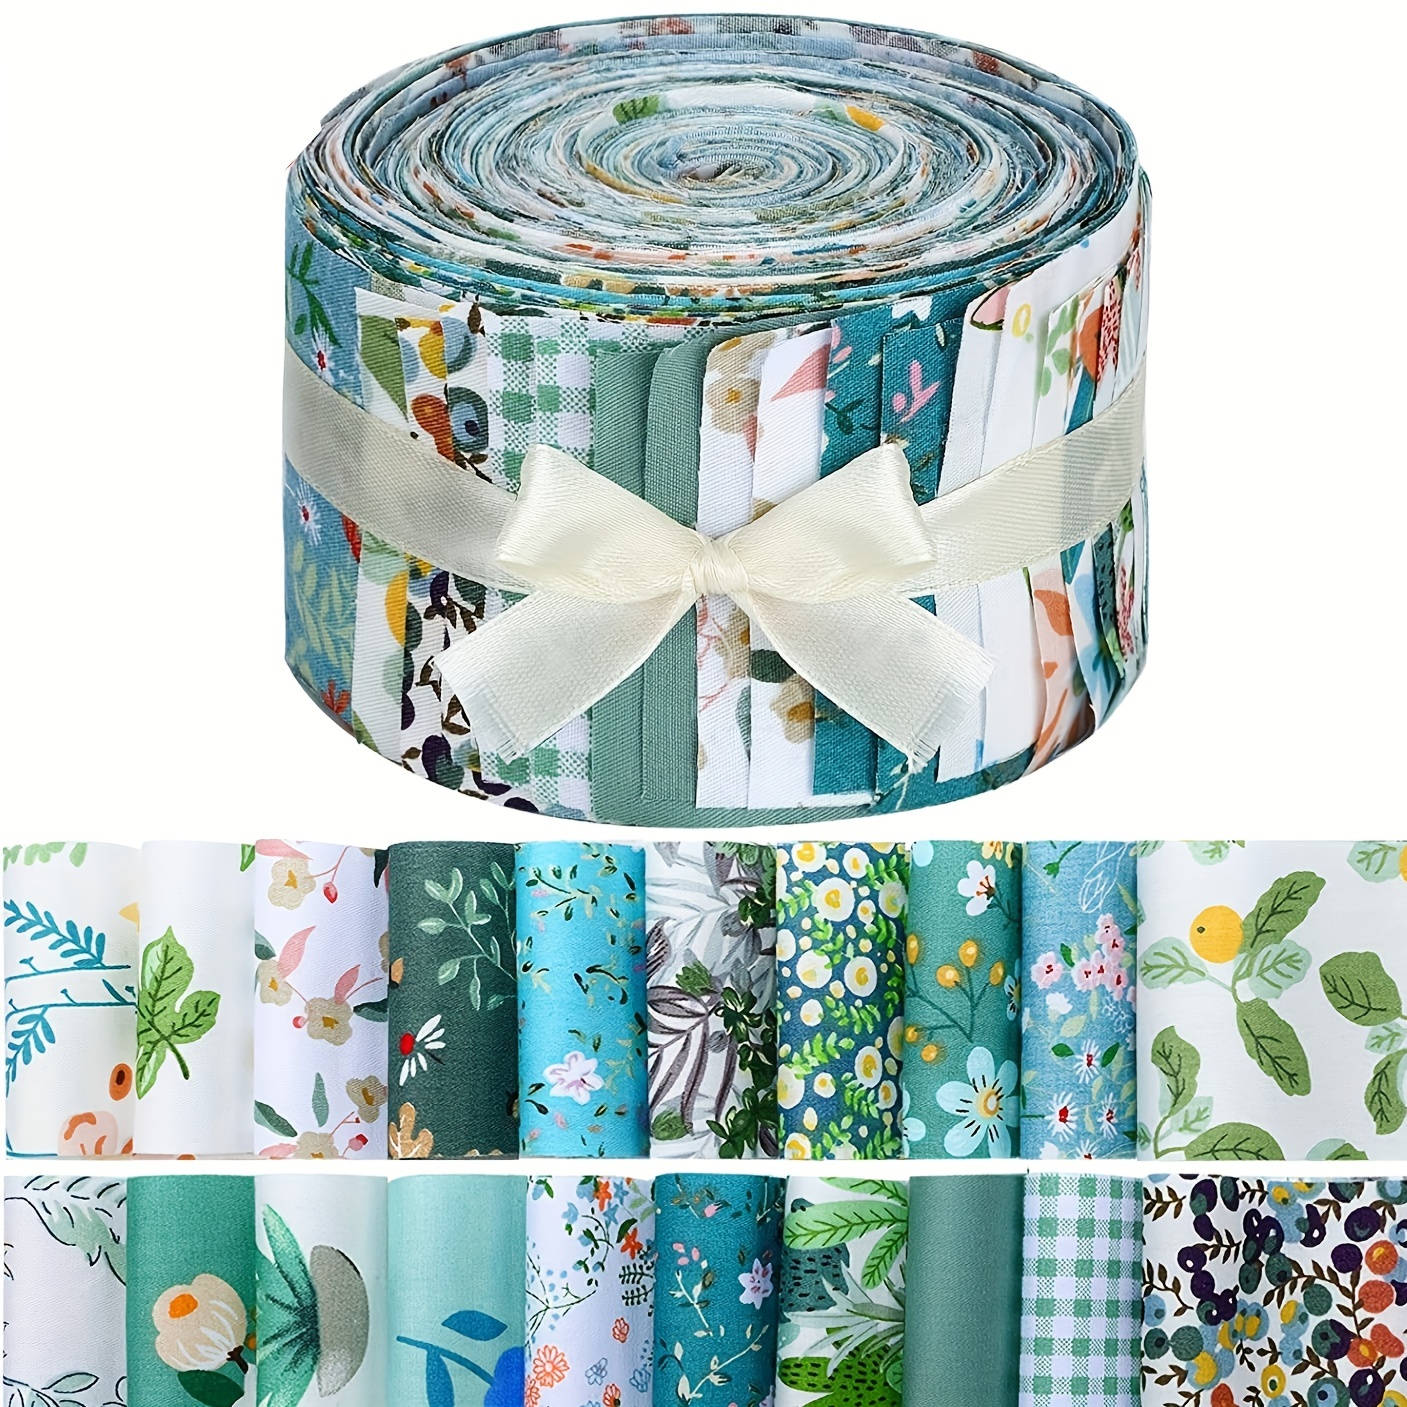 Tudomro 30 Pieces Japanese Style Fabric Squares 8 x 10 Inch Fabric Bundle  Squares Patchwork, Wrapping Cloth Quilting Fabric Bundles for DIY Patchwork  Sewing Supplies (Fresh Style)